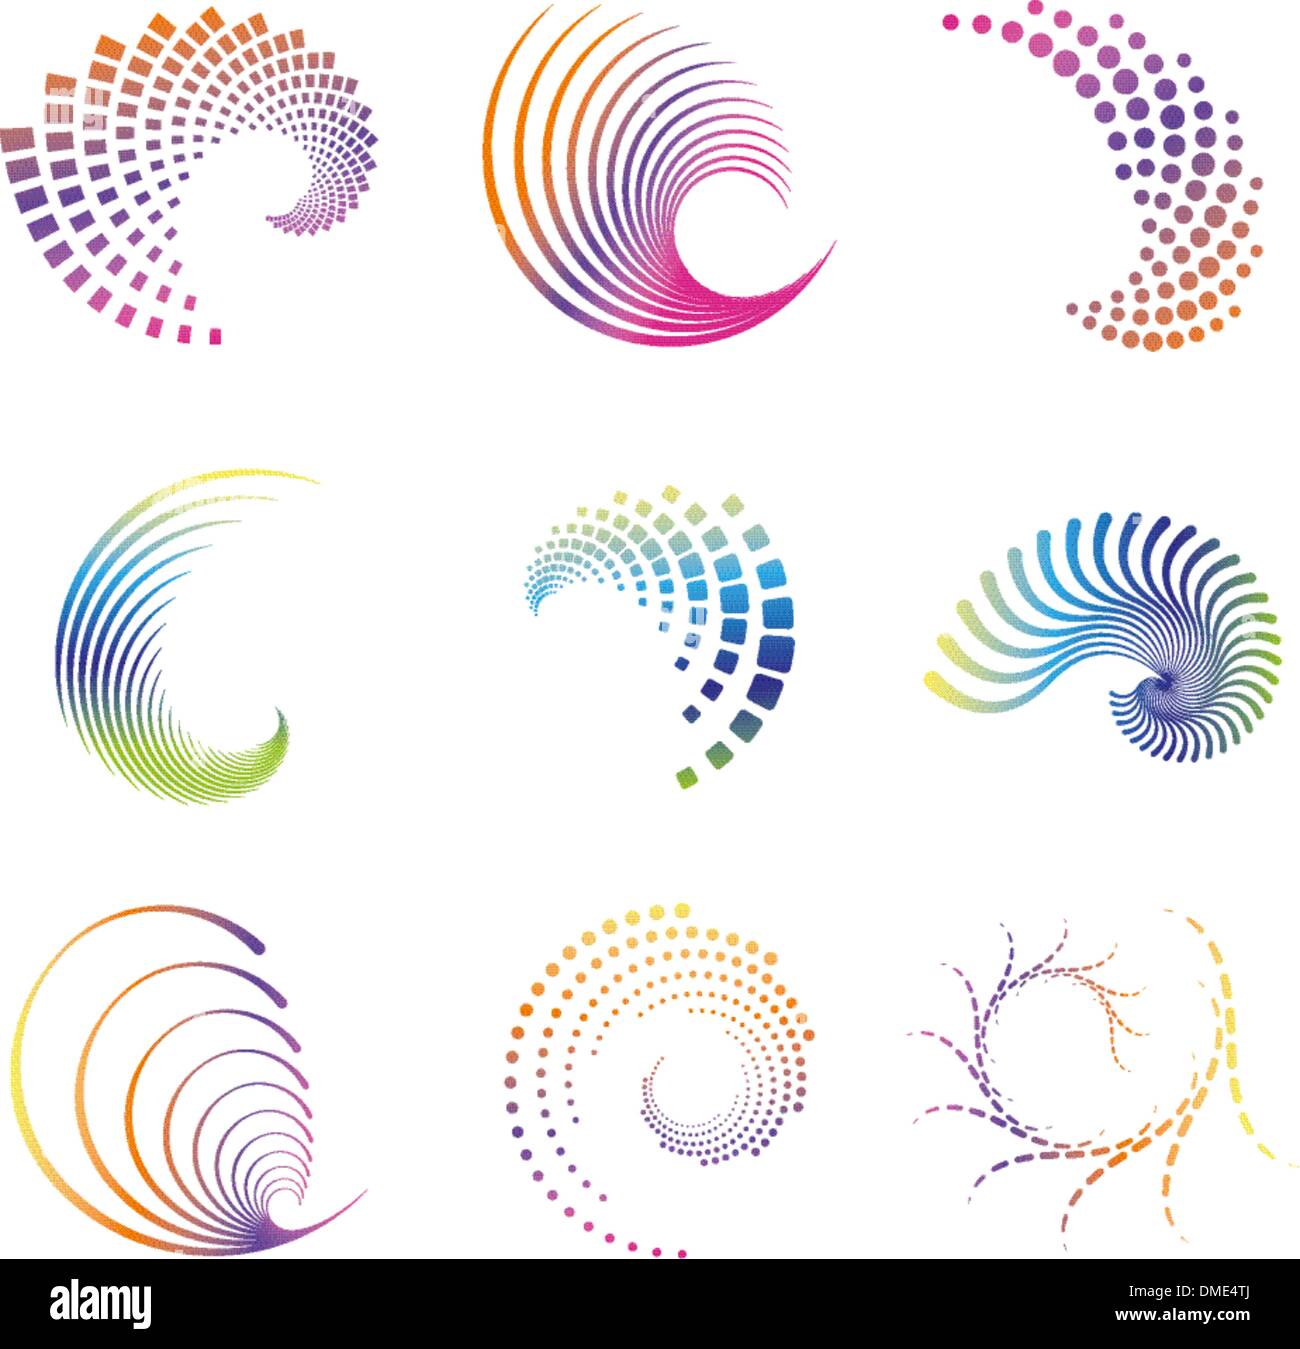 Design wave icons Stock Vector